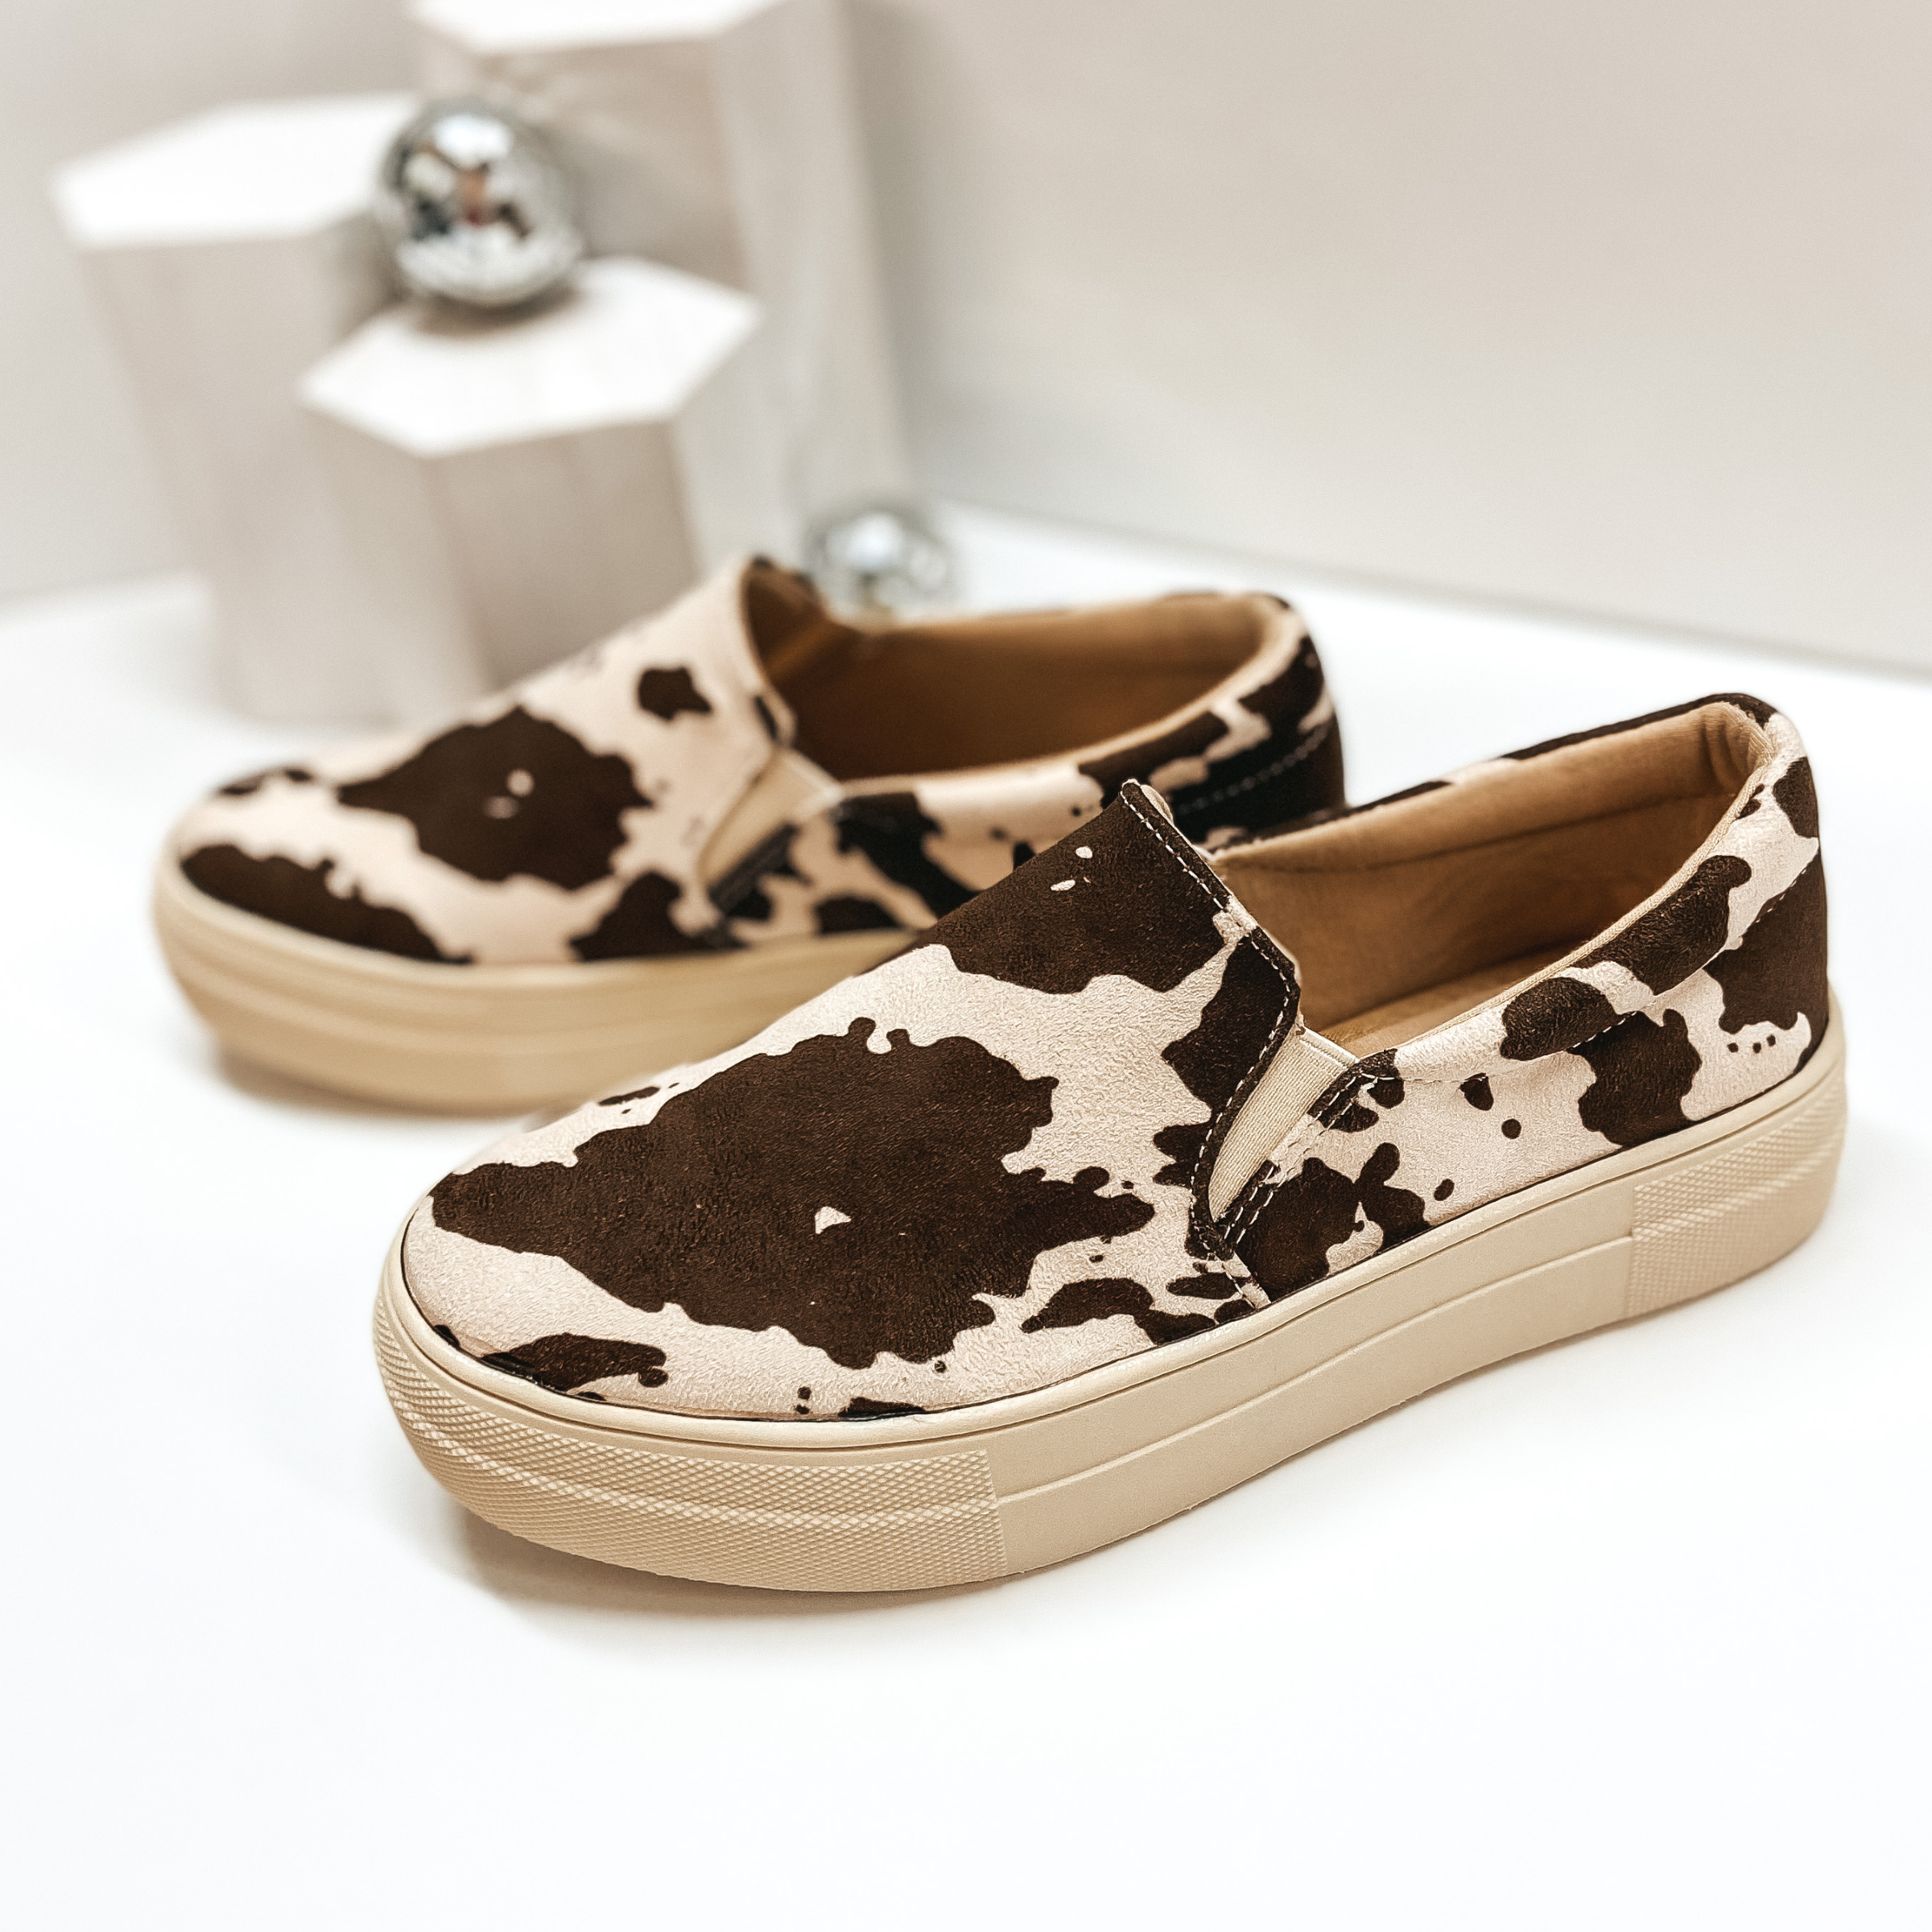 Slip on brown and ivory cow print sneakers with thick ivory sole. Pictured against a white background.